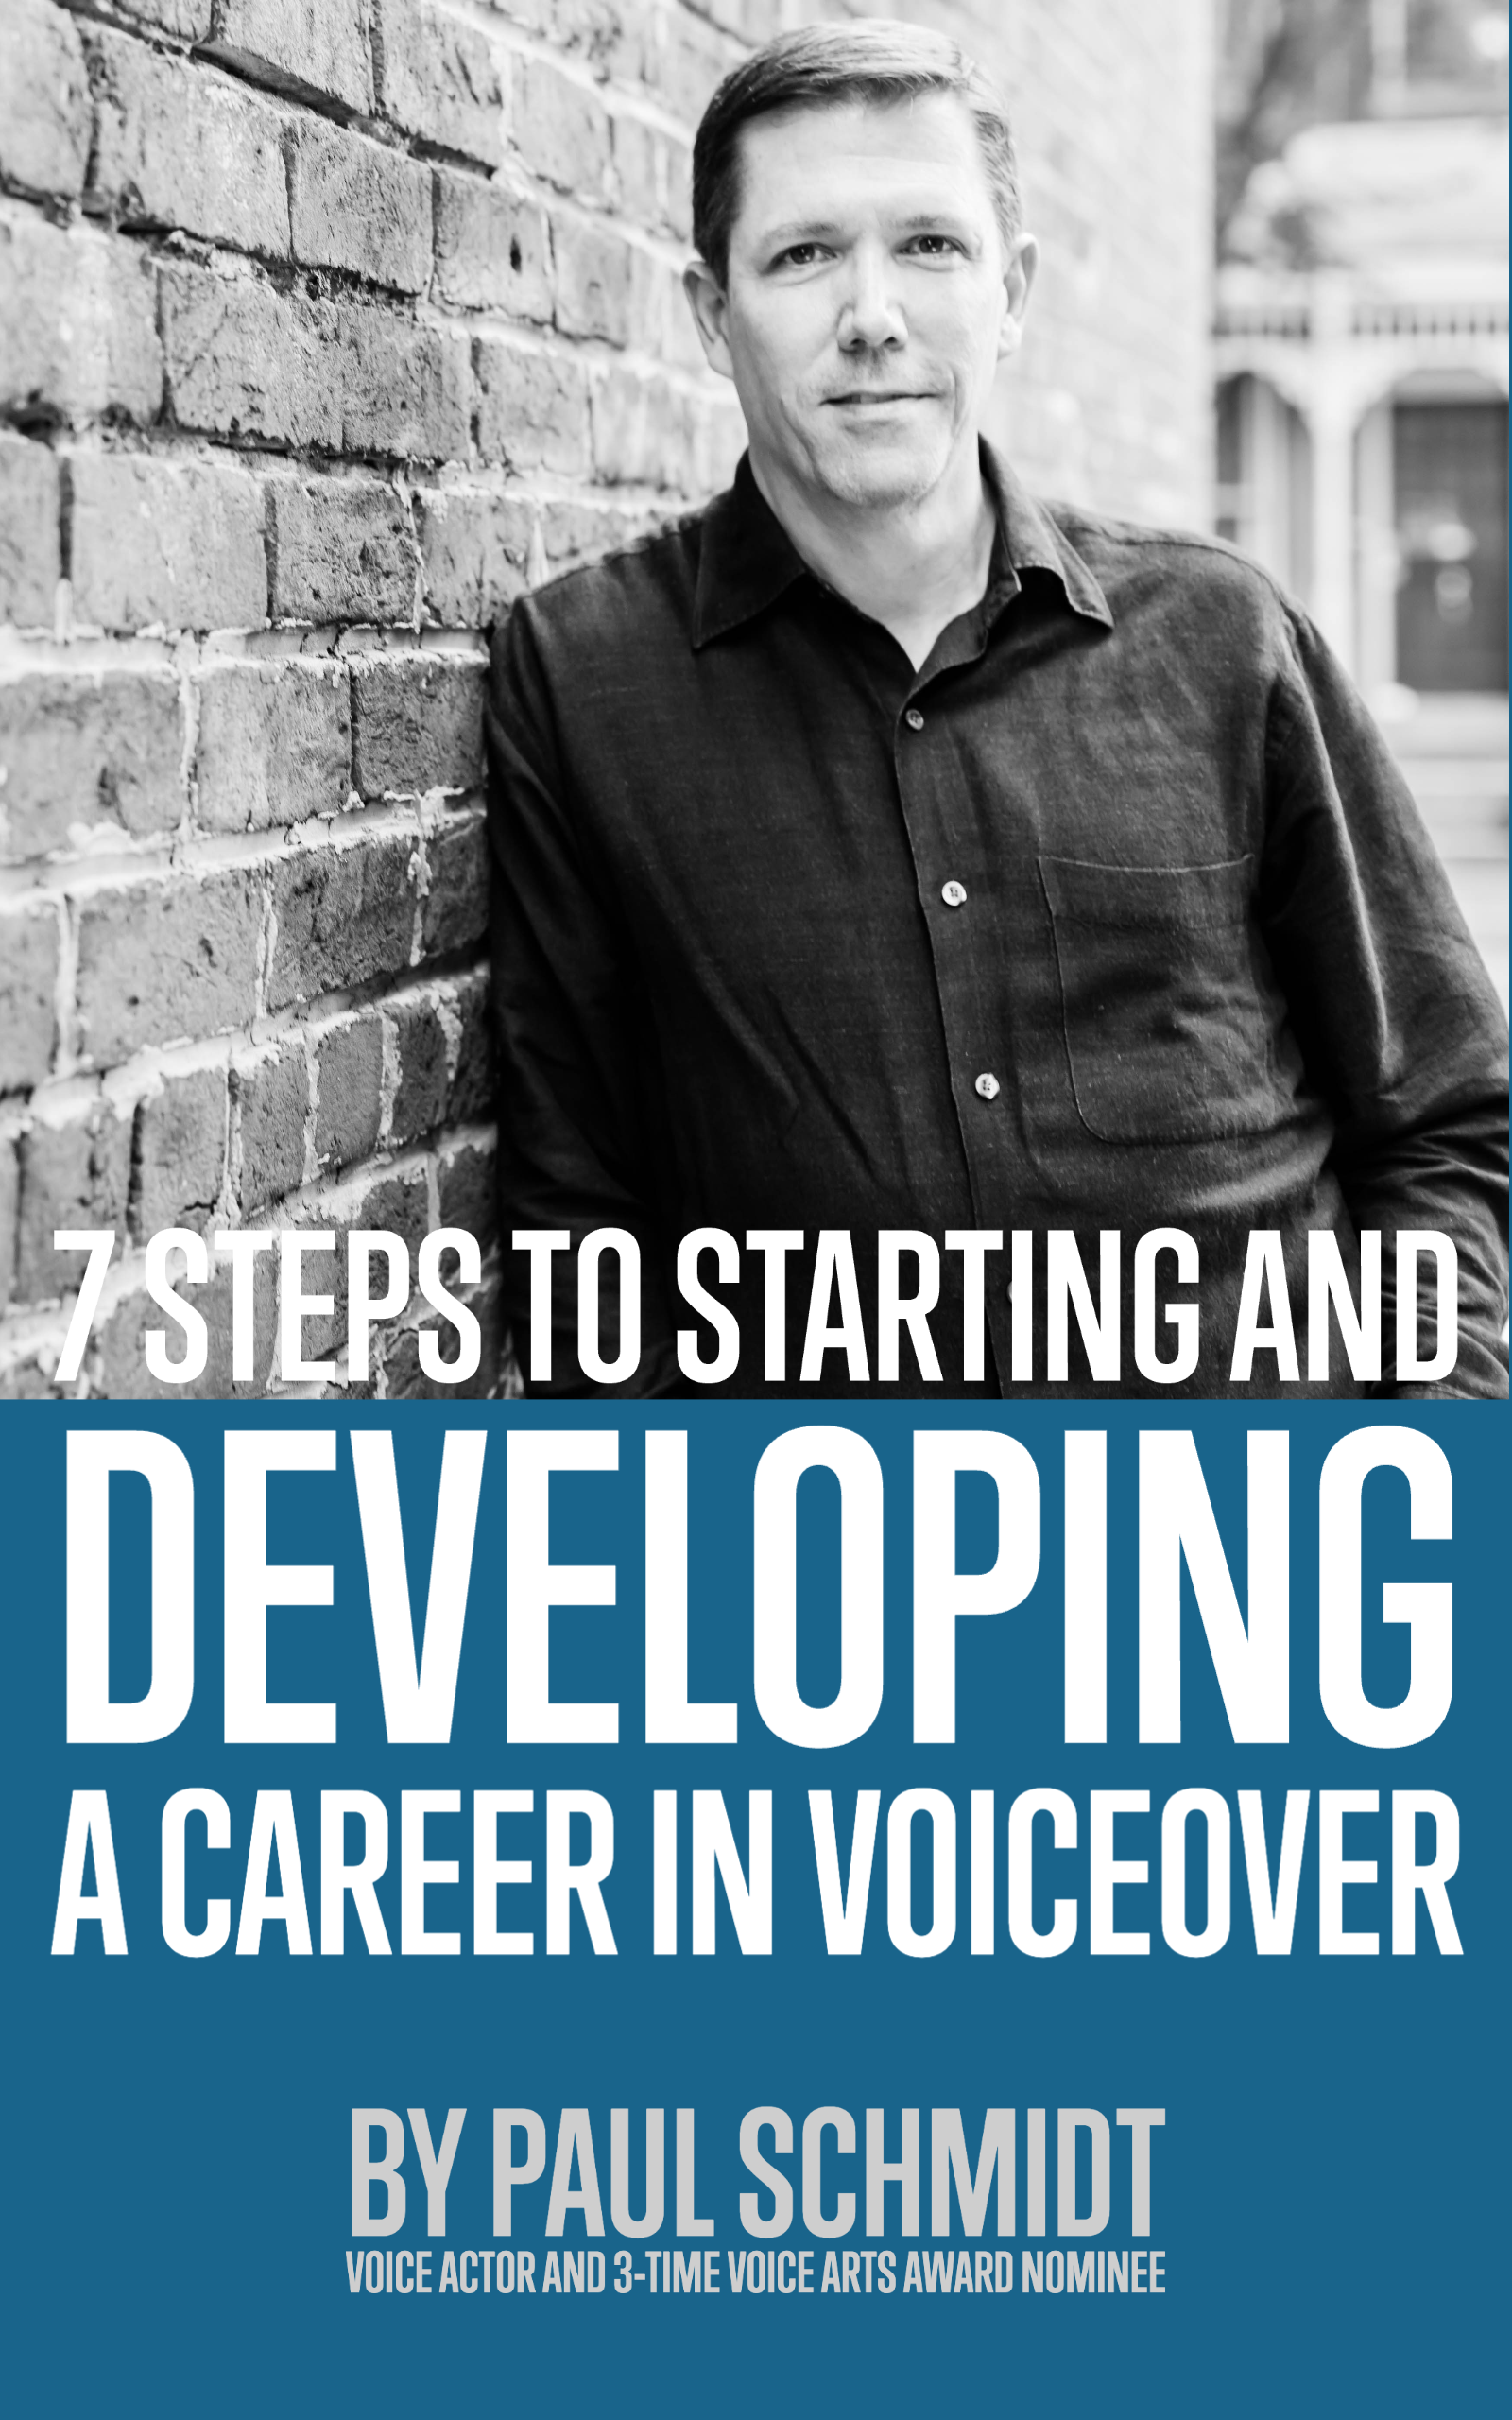 Voice Over: Learn to Do It Like a Pro